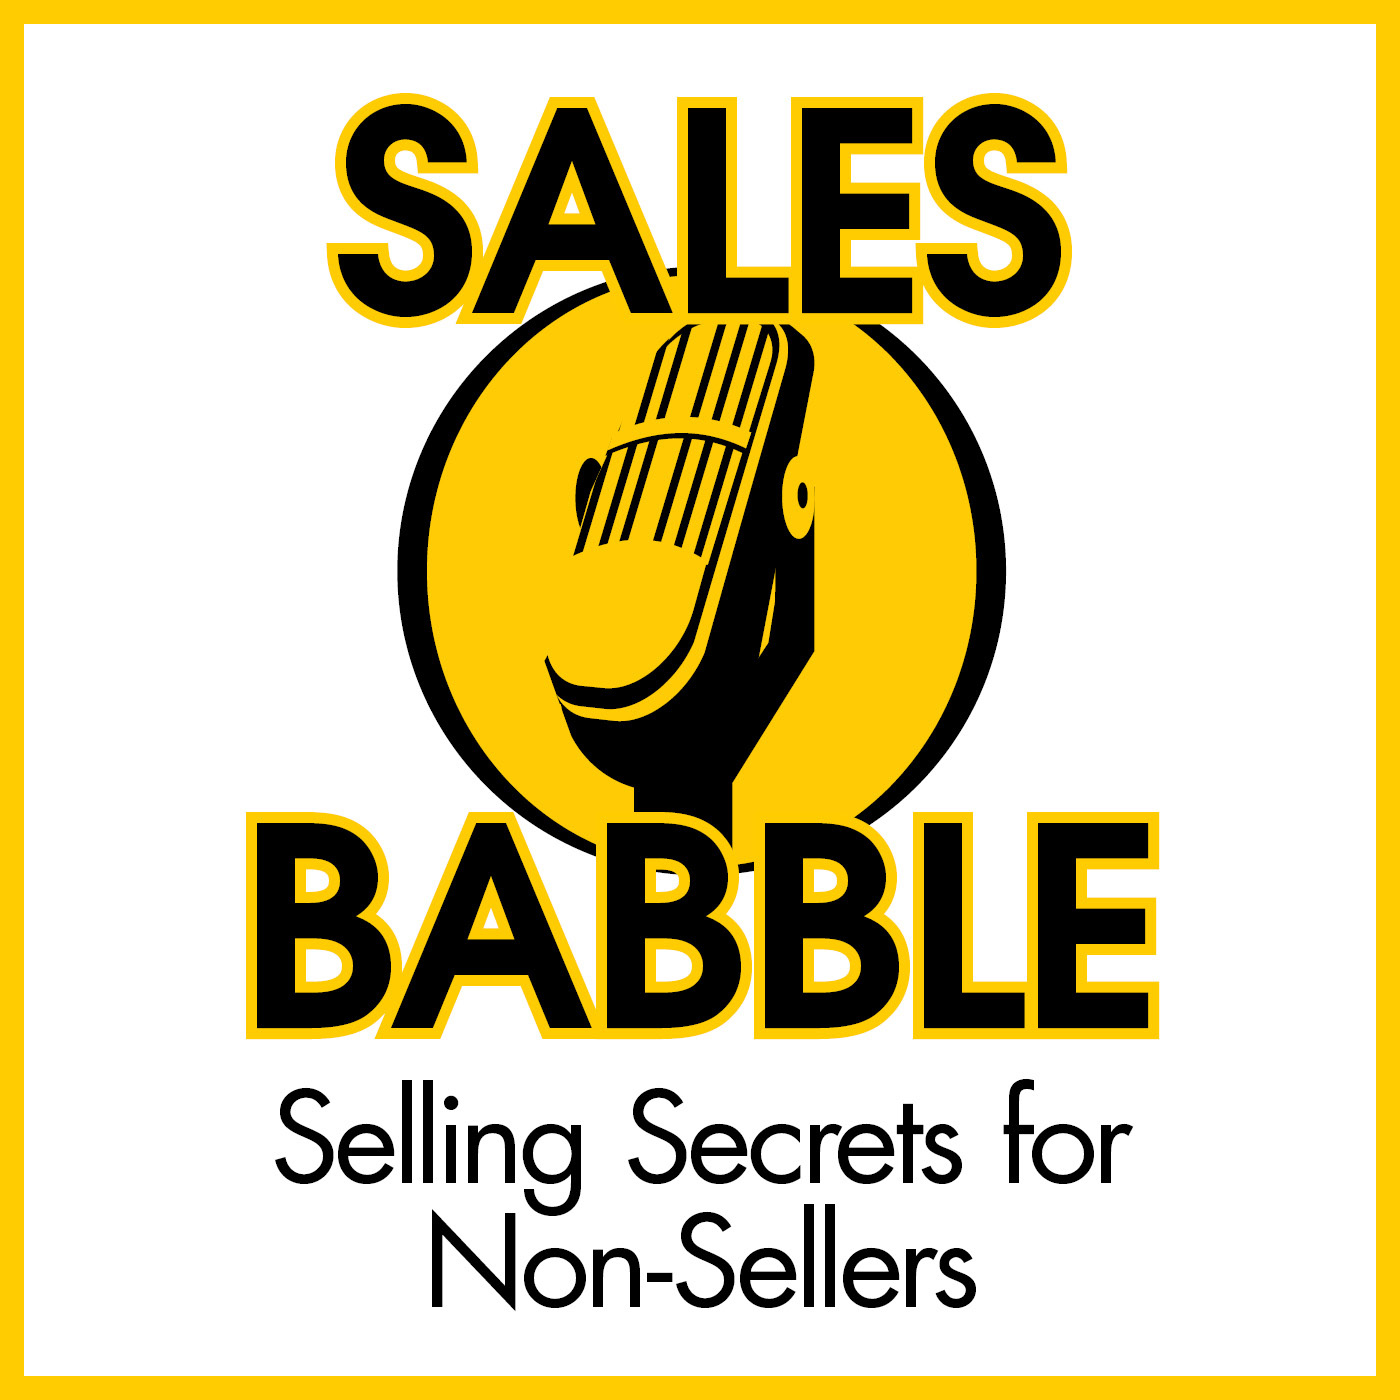 Sales Babble Podcast